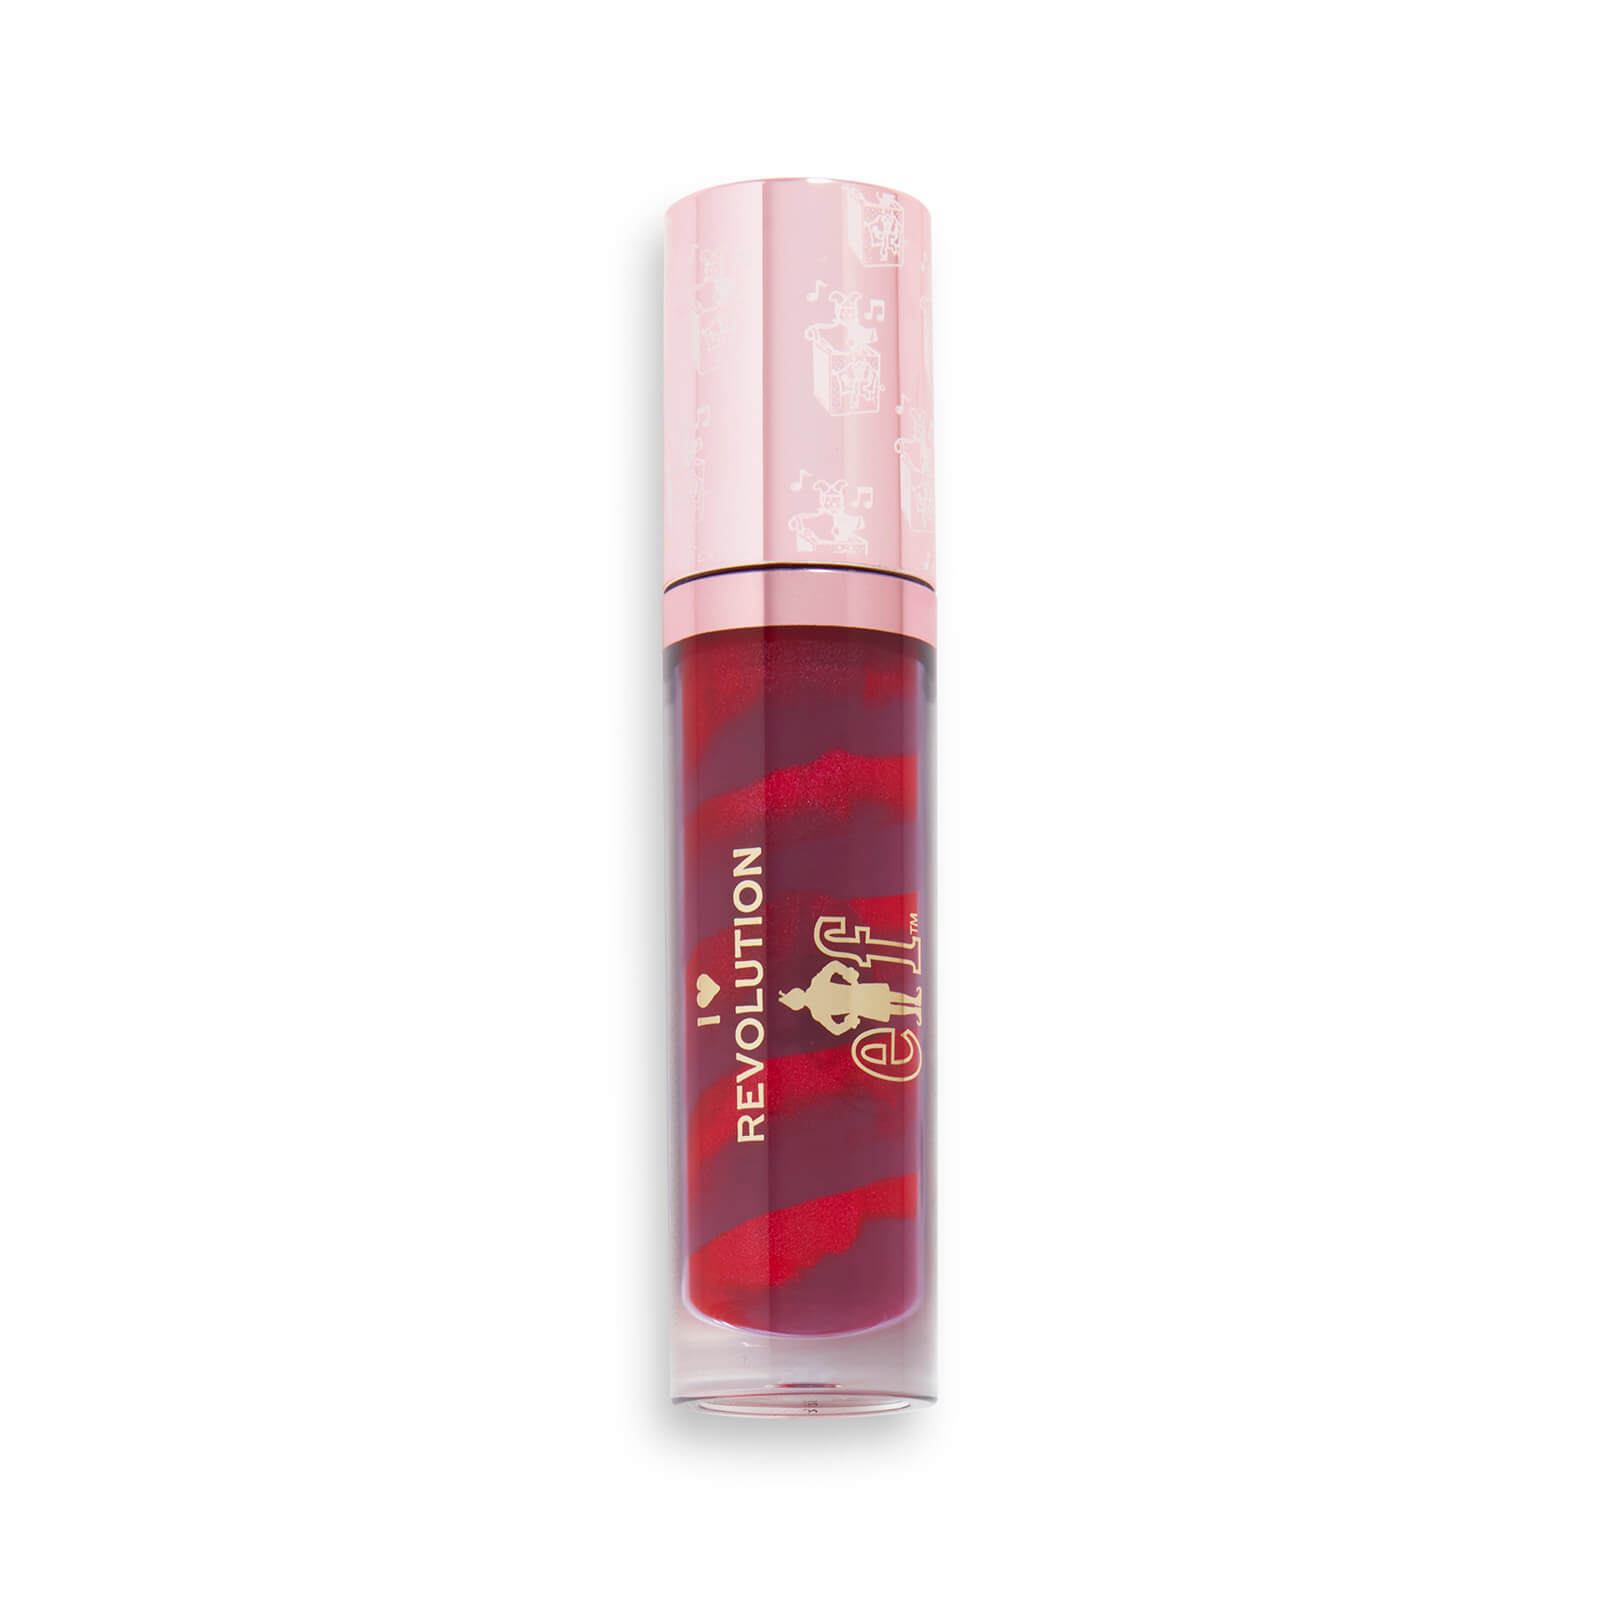 Image of I Heart Revolution x Elf Candy Cane Lip Gloss 7.5ml (Various Shades) - Jack In The Box